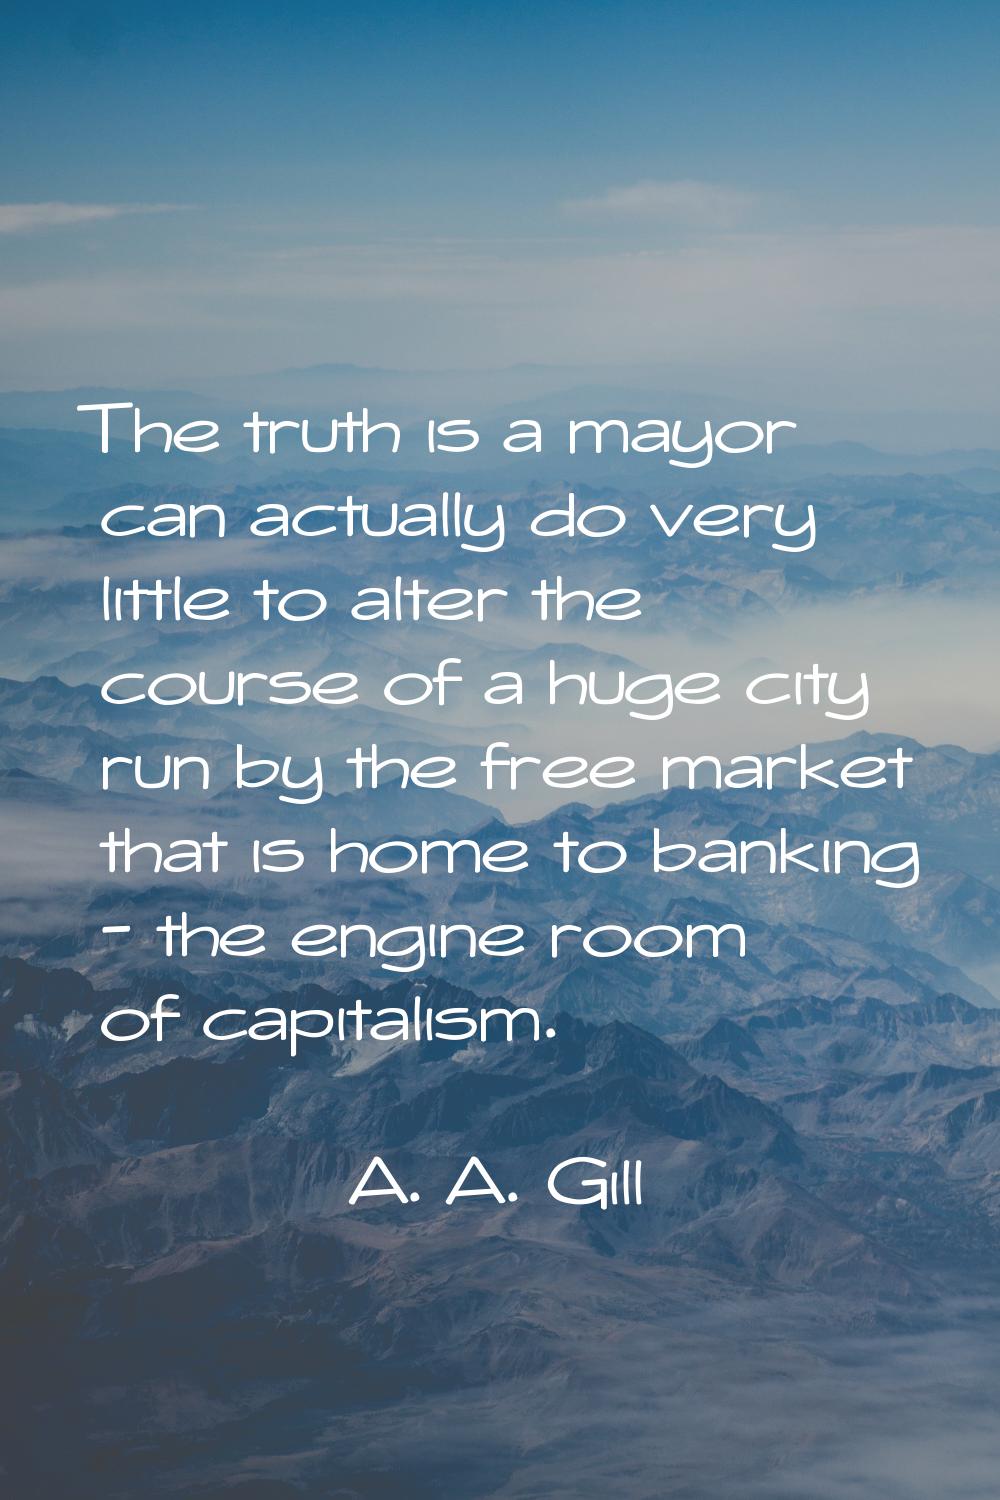 The truth is a mayor can actually do very little to alter the course of a huge city run by the free